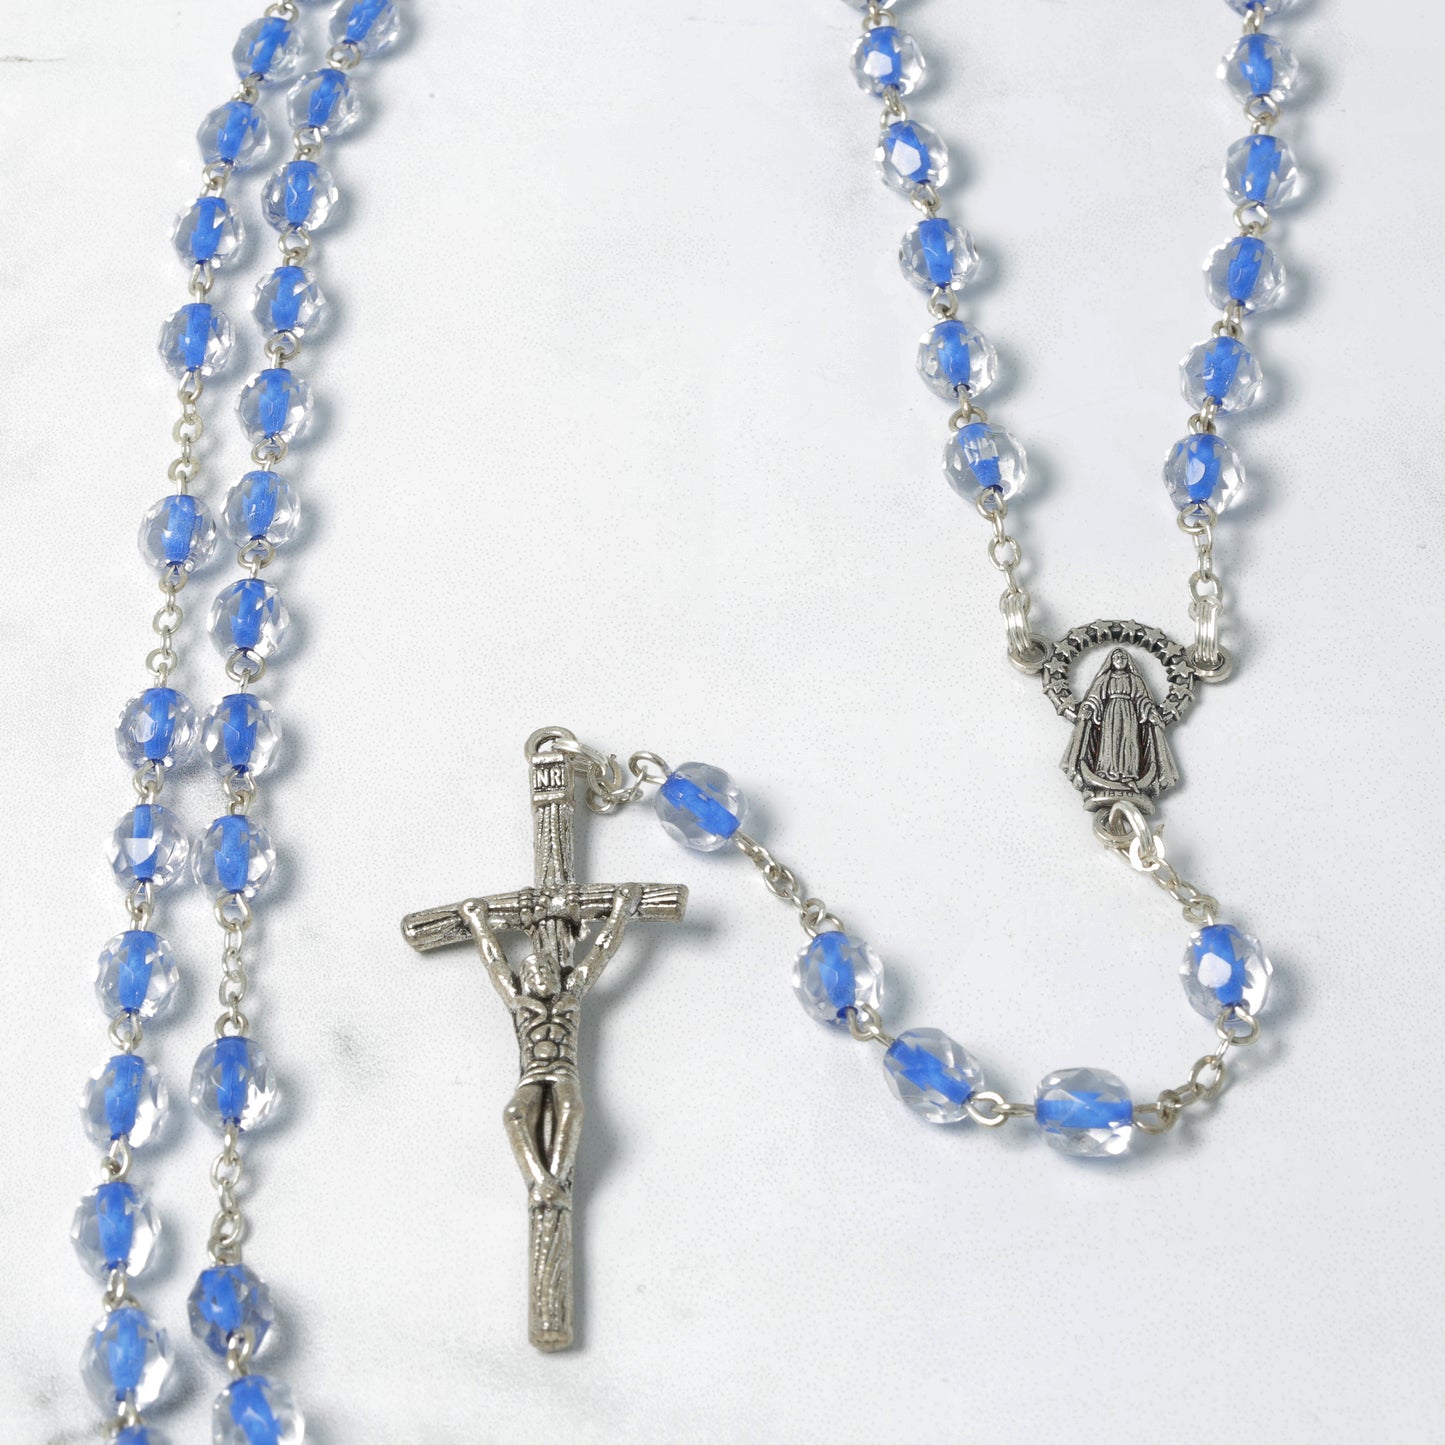 Blue Soul Crystal Rosary with Box Souvenirs from Italy